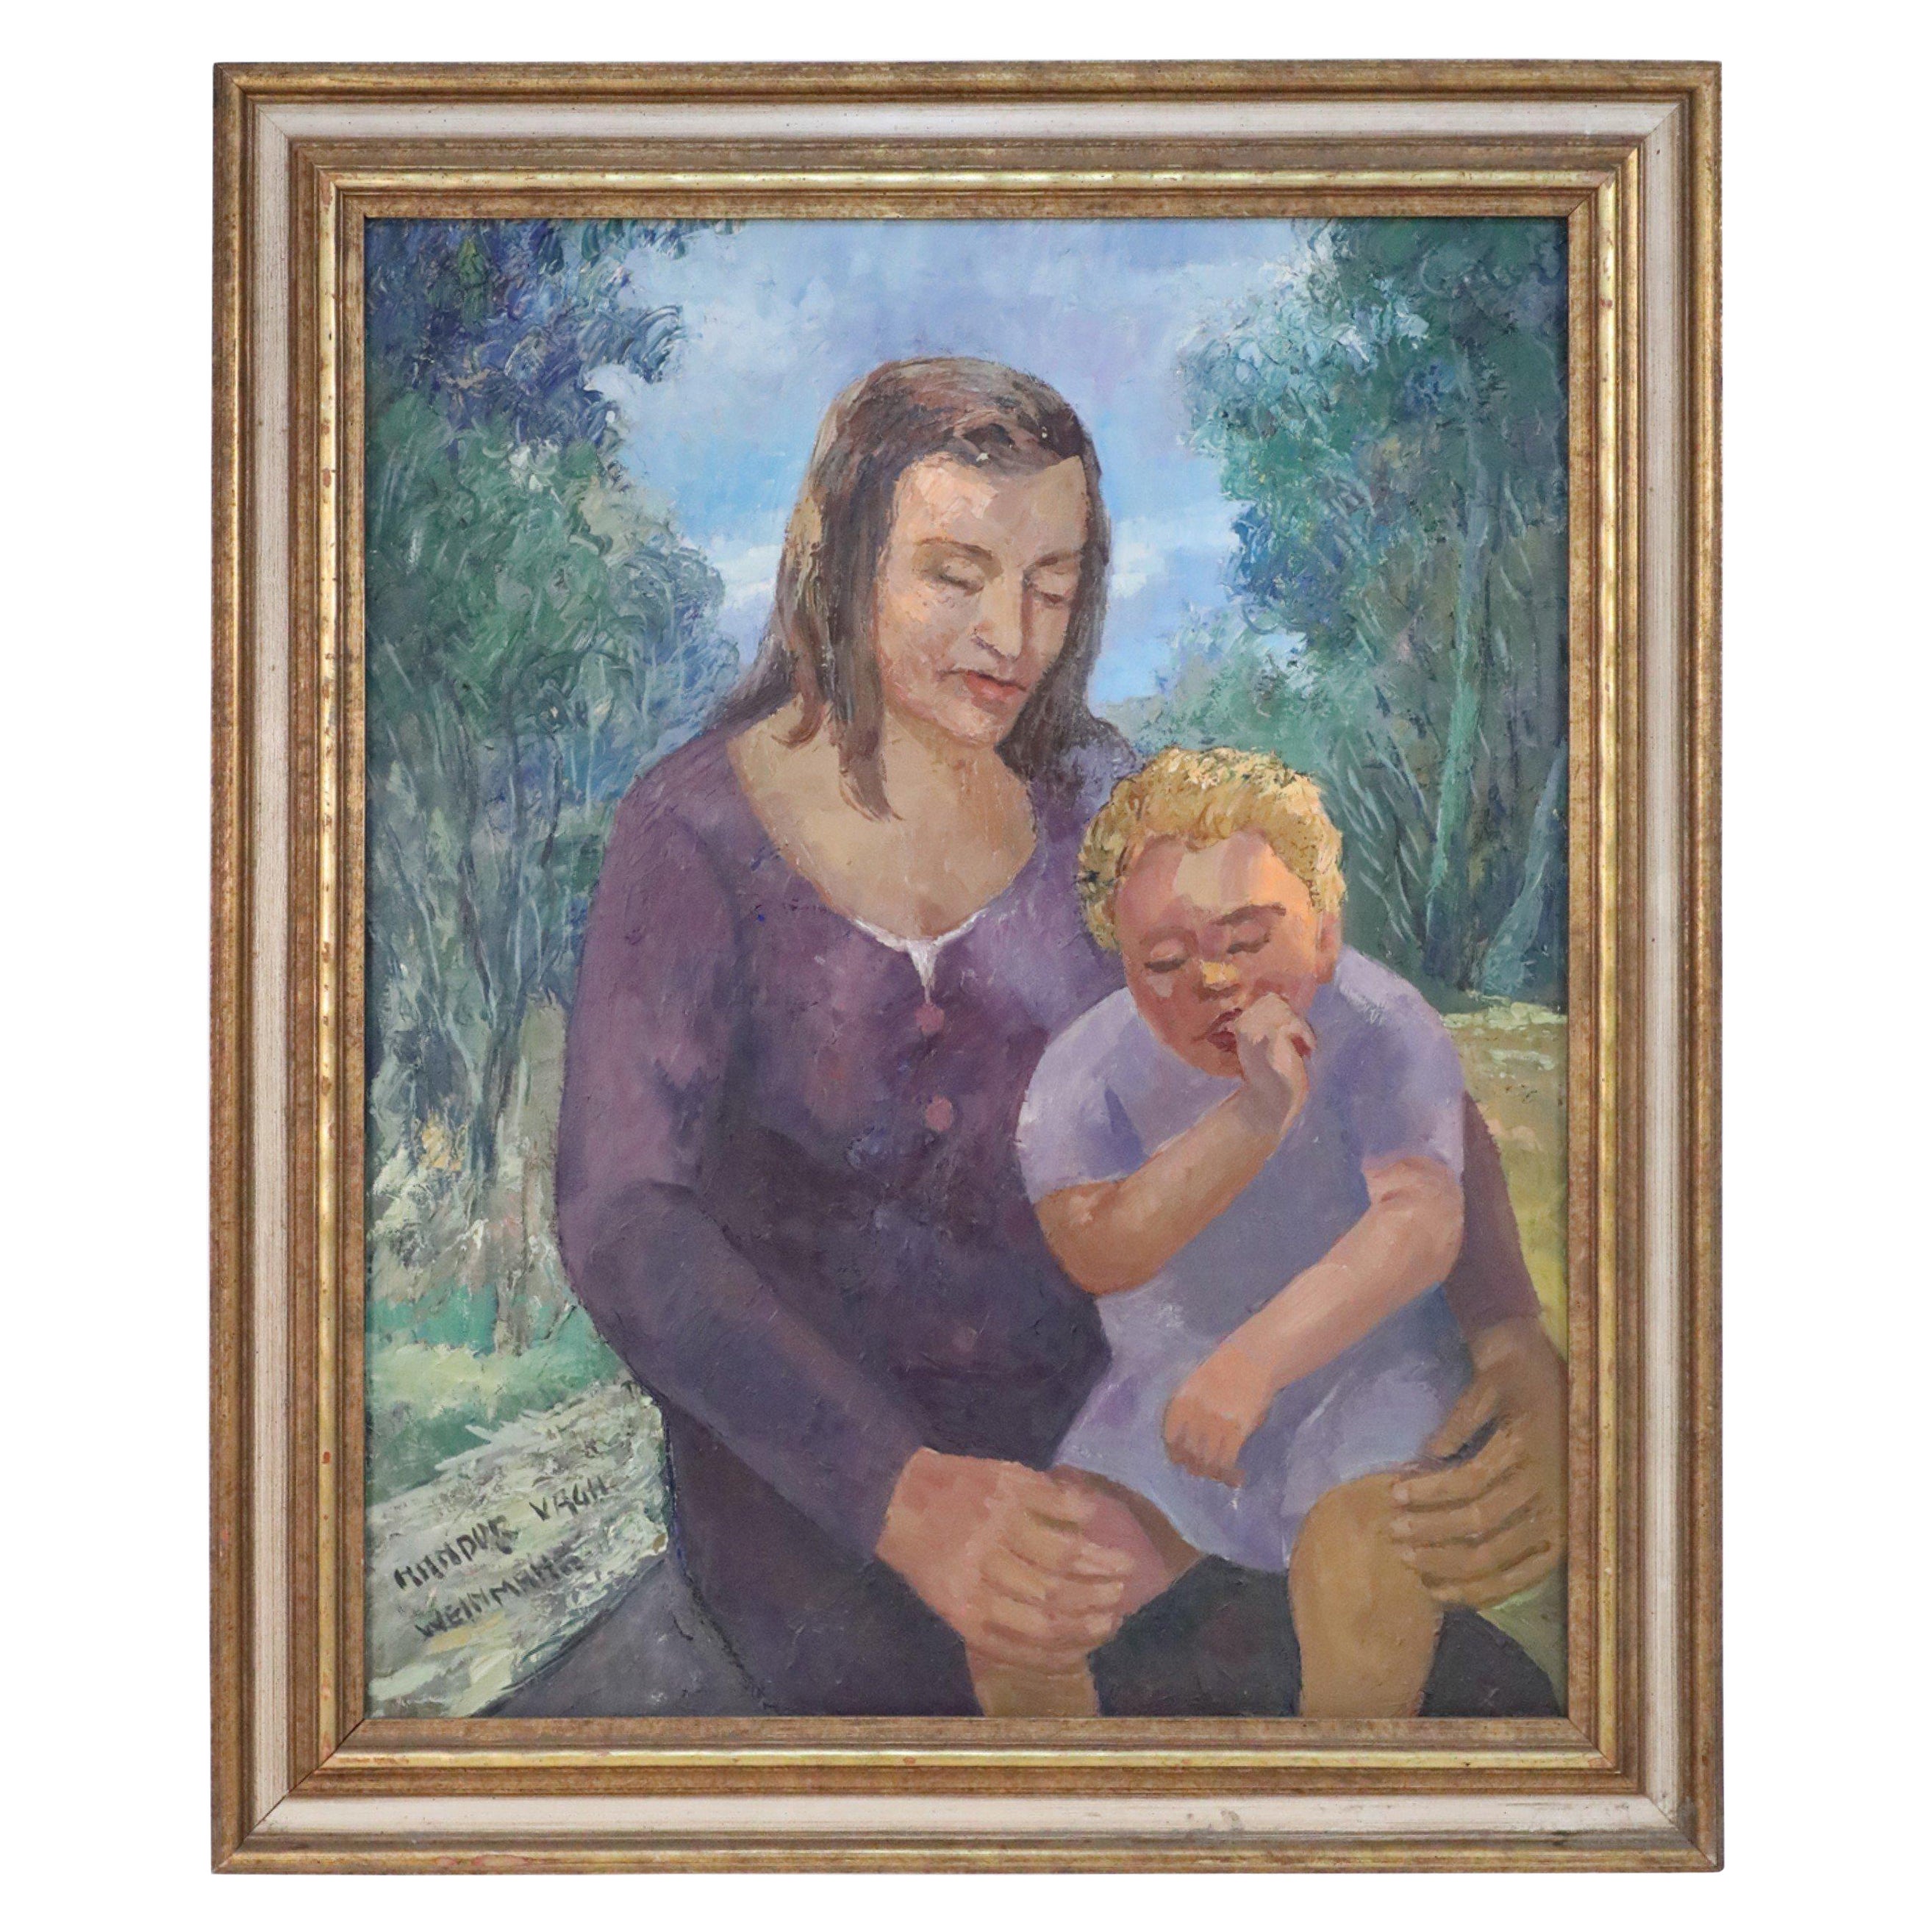 Framed Woman with Child Portrait Oil Painting